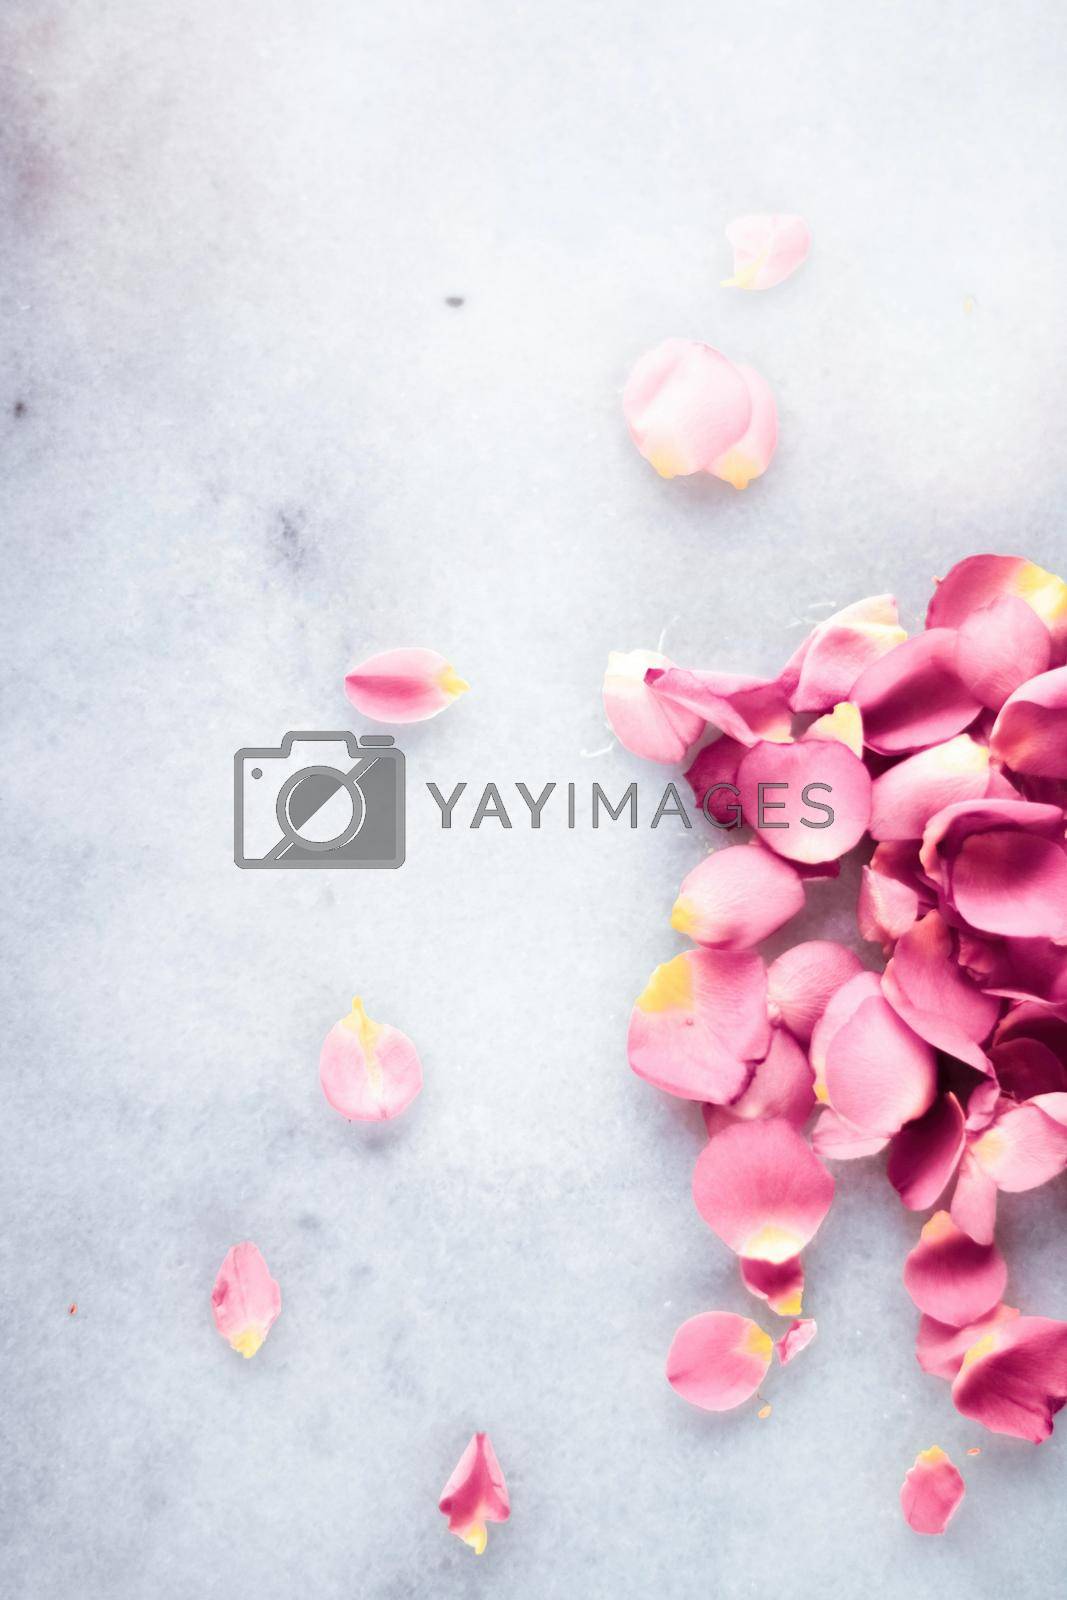 Delicate rose petals on marble stone - art of flowers, luxury background and floral beauty concept. A touch of romance